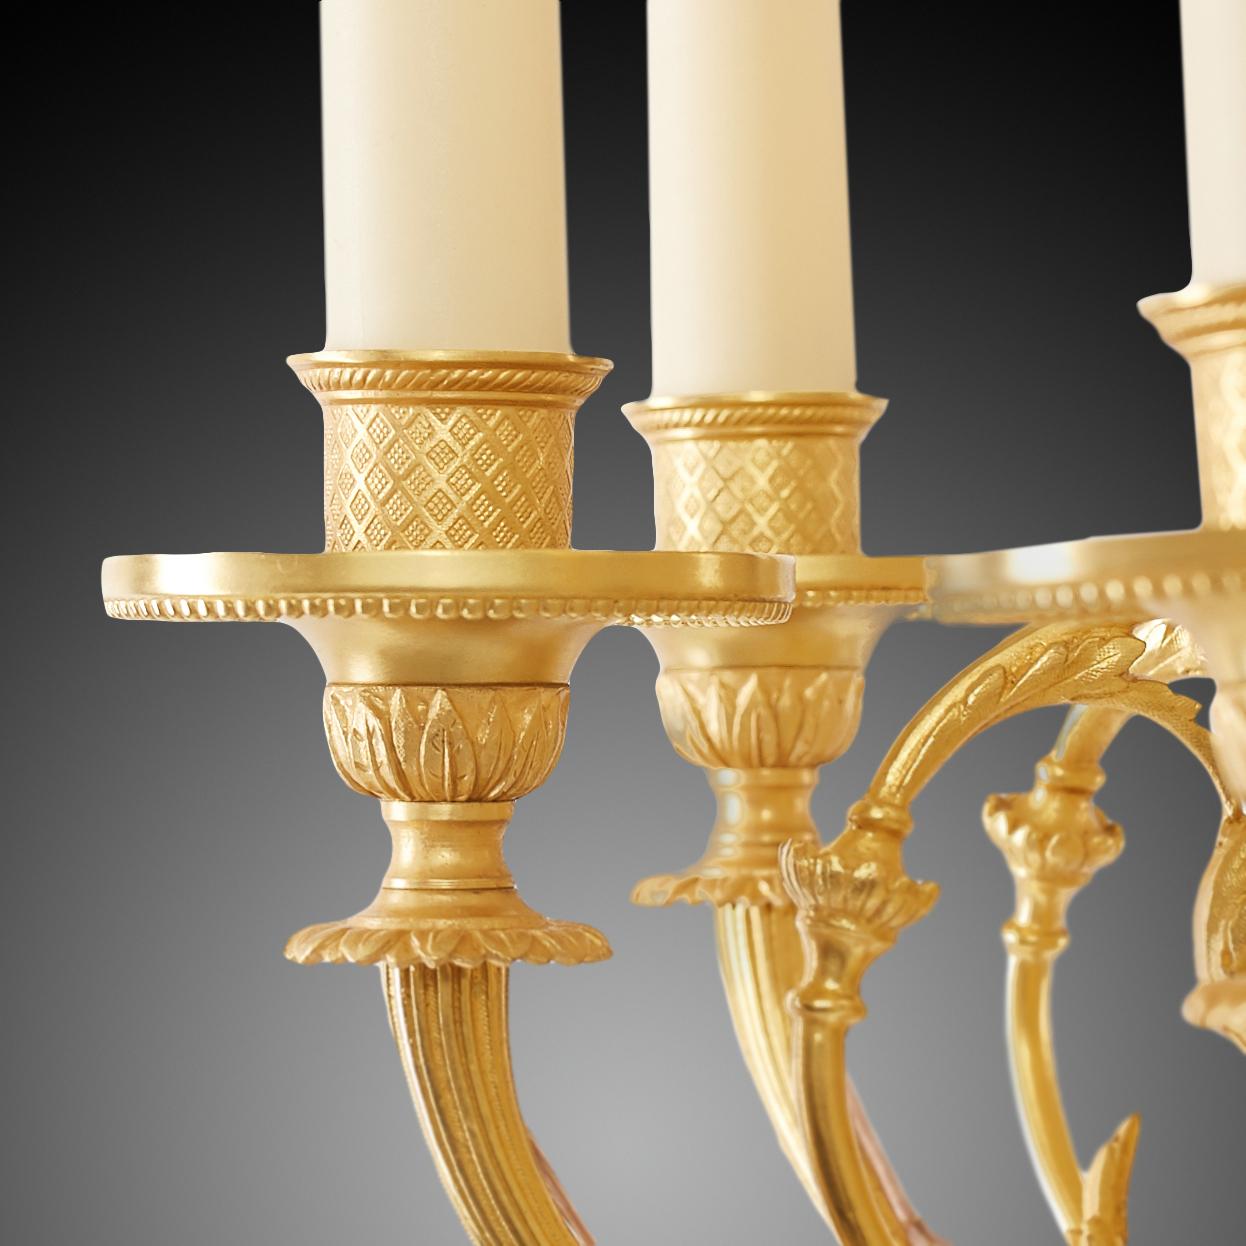 Pair of Candelabra 19th Century Louis-Philippe For Sale 5